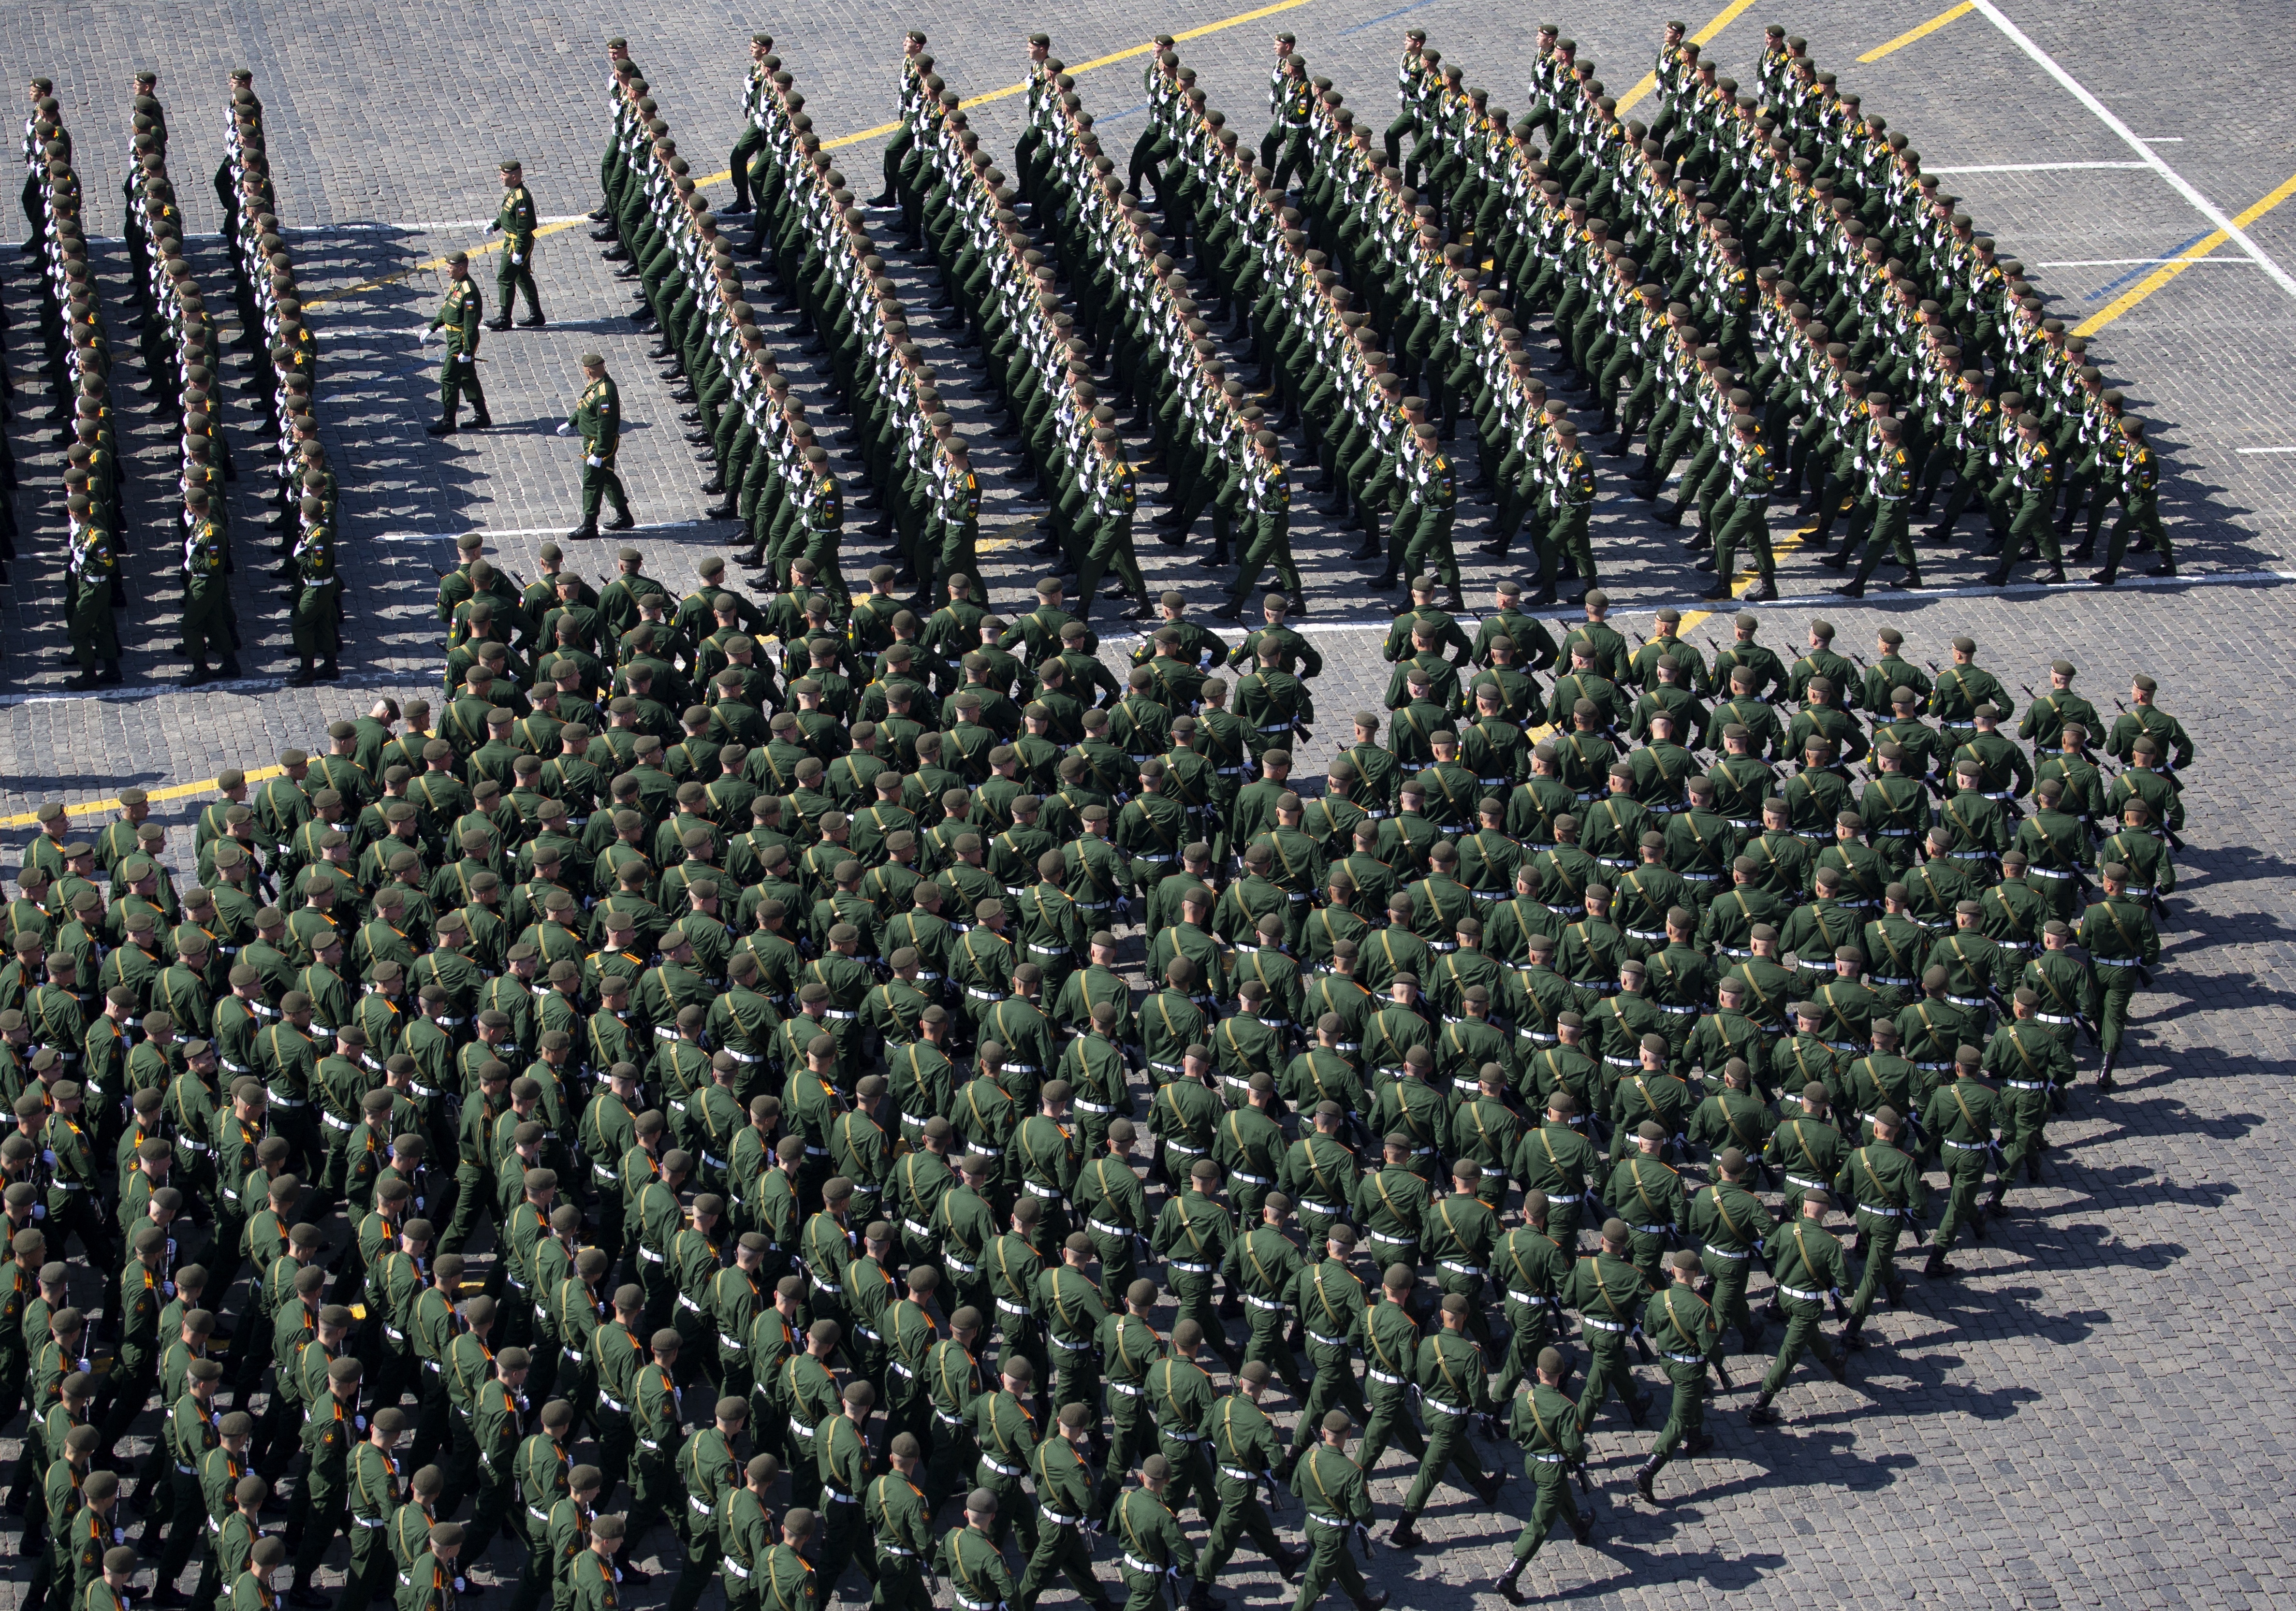 Russian troops march during a rehearsal for the Victory Day military parade in Red Square in Moscow, Russia, Tuesday, May 7, 2019. The parade will take place at Moscow's Red Square on May 9 to celebrate 74 years of the victory in WWII. (AP Photo/Alexander Zemlianichenko, Pool)